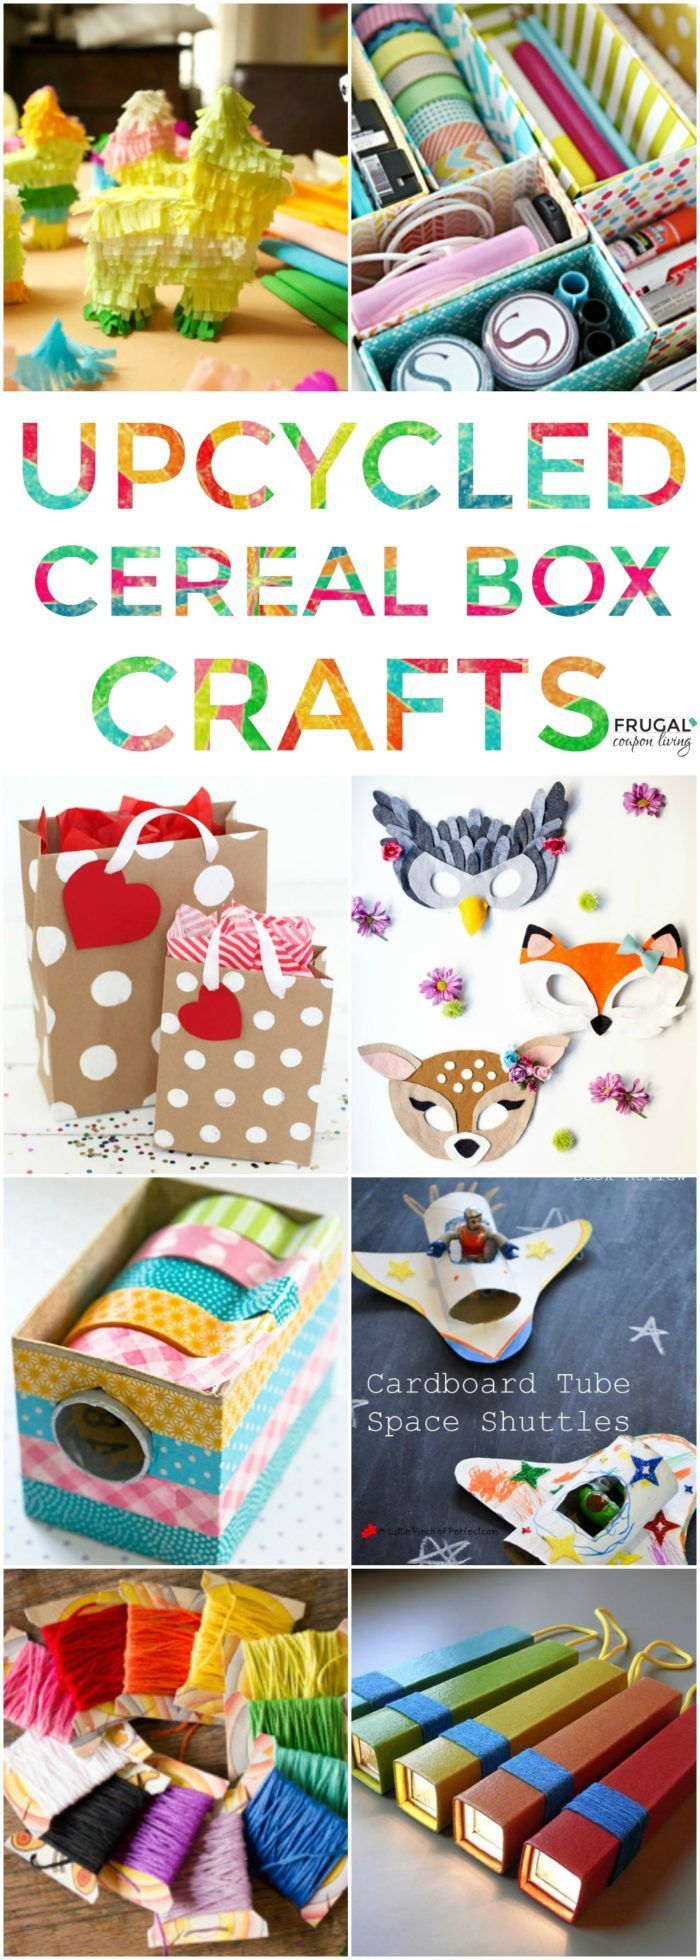 Upcycled Cereal Box Crafts -   20 recycled crafts for adults
 ideas